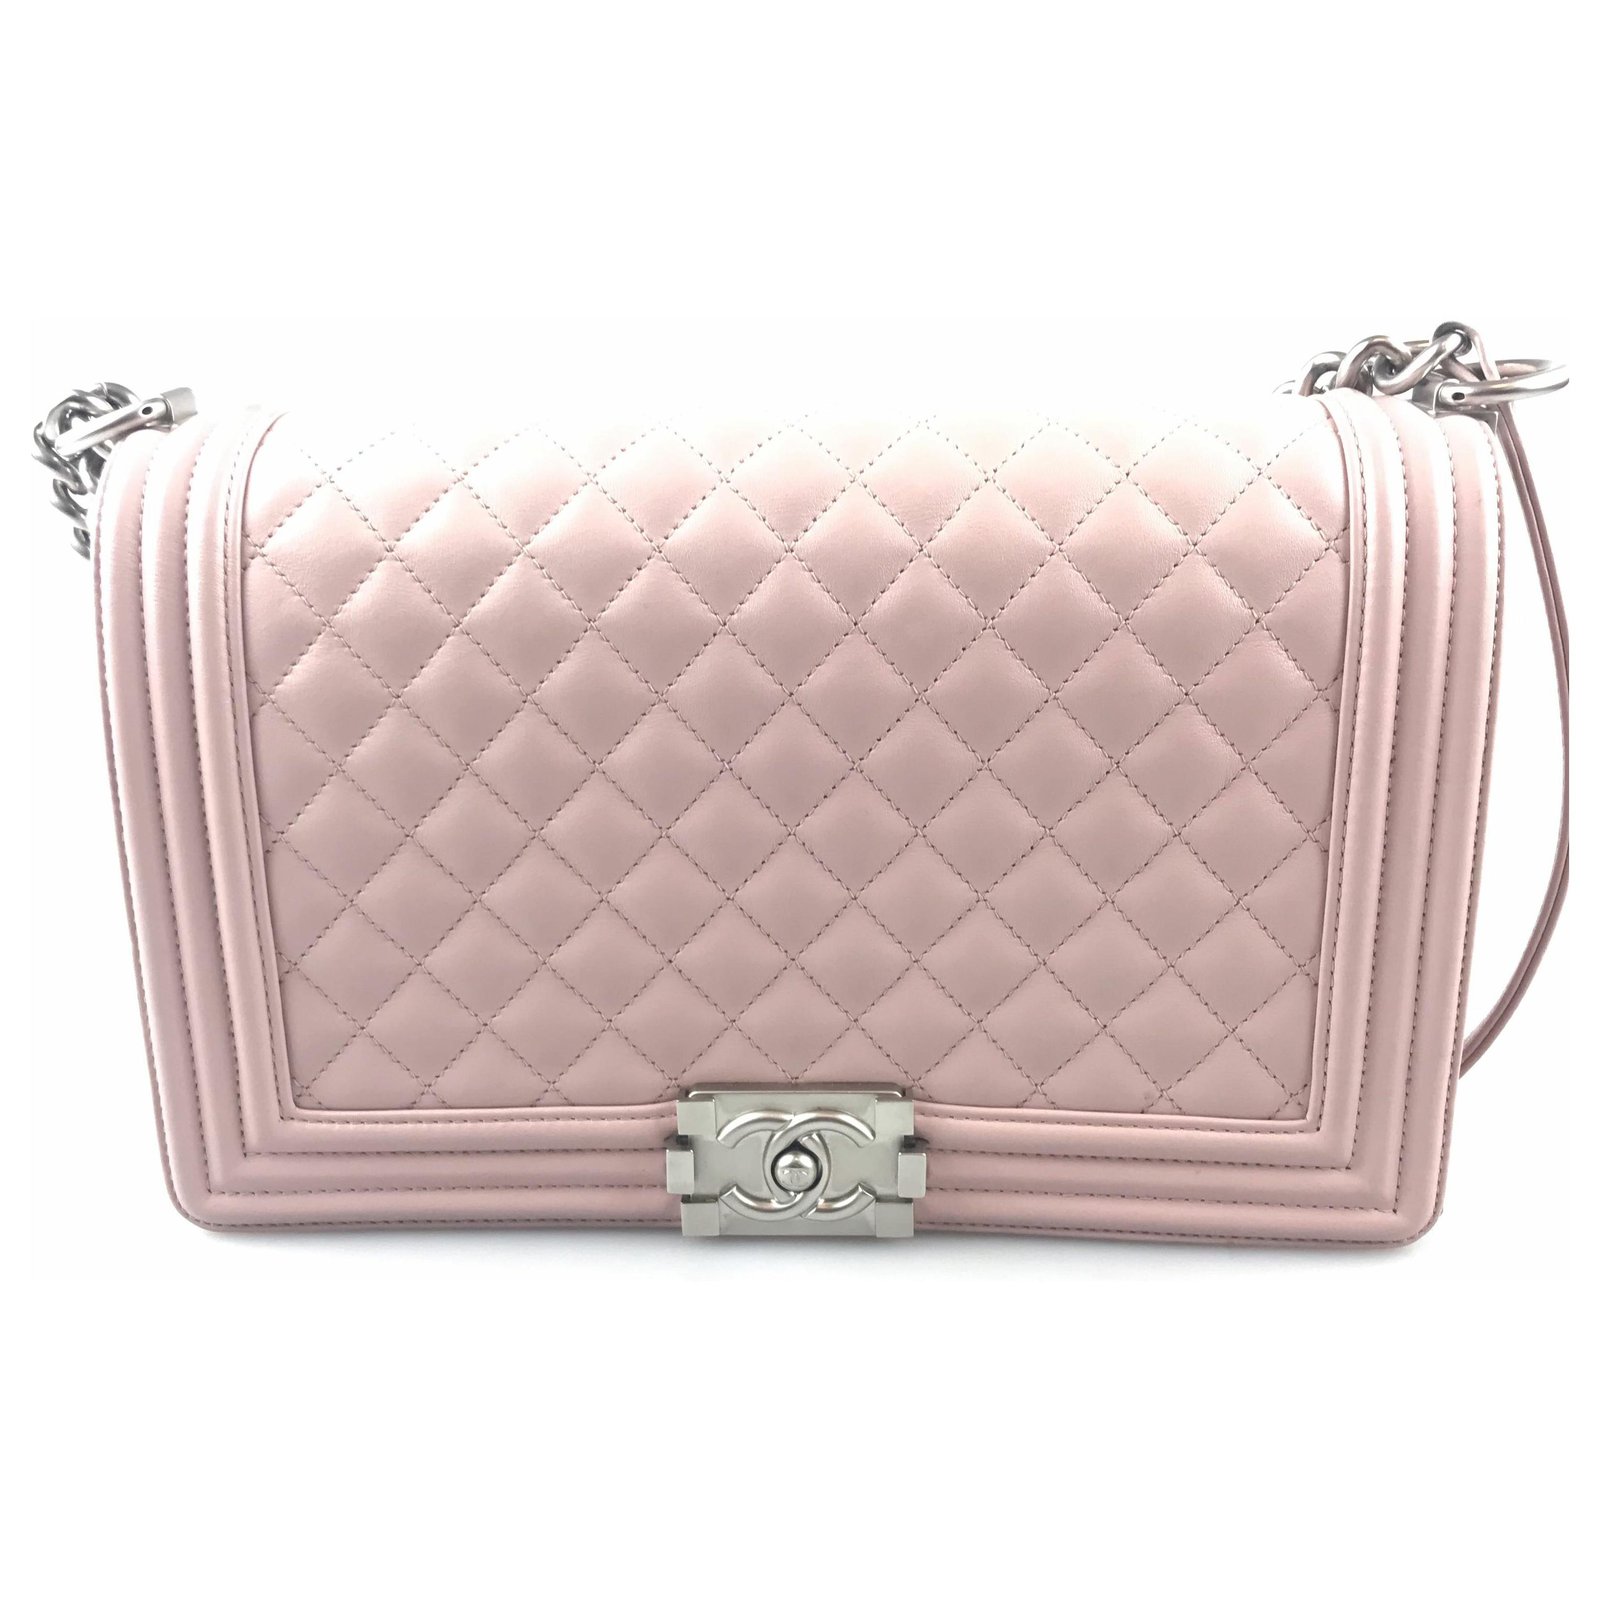 CHANEL Pink Boy Flap Chain Shoulder Handbag Quilted Lambskin Leather